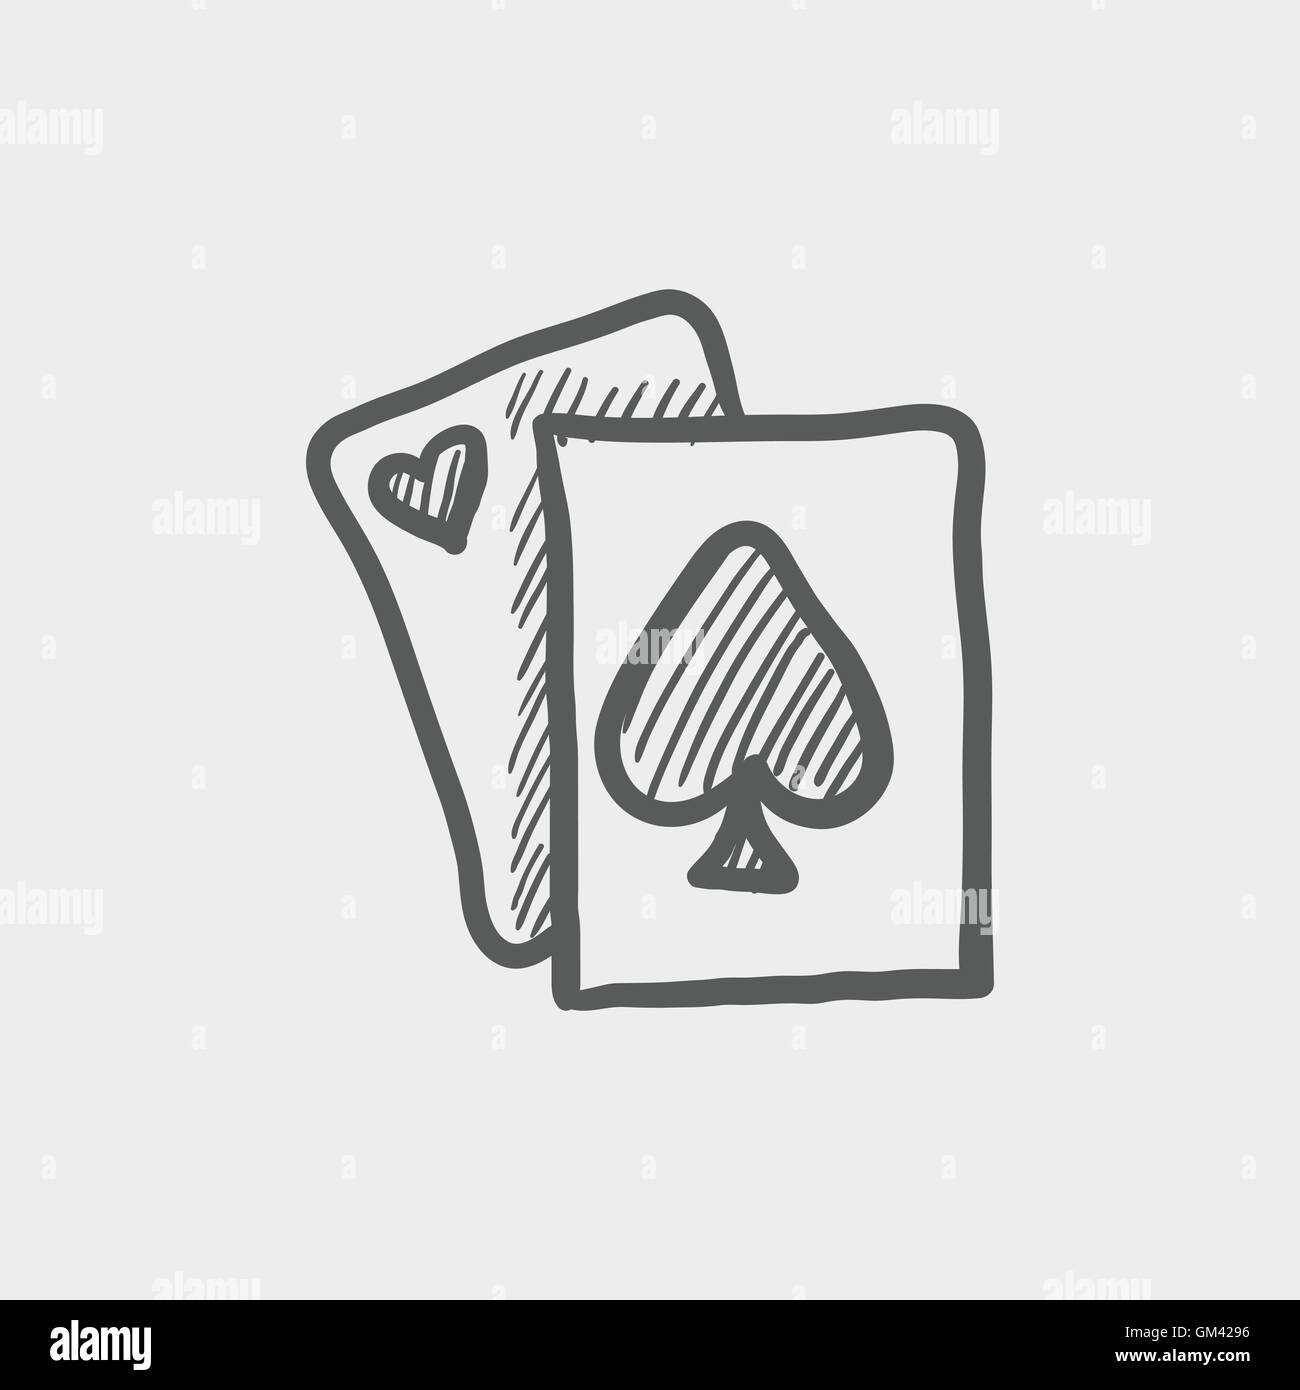 Realism Playing cards tattoo sketch at theYoucom